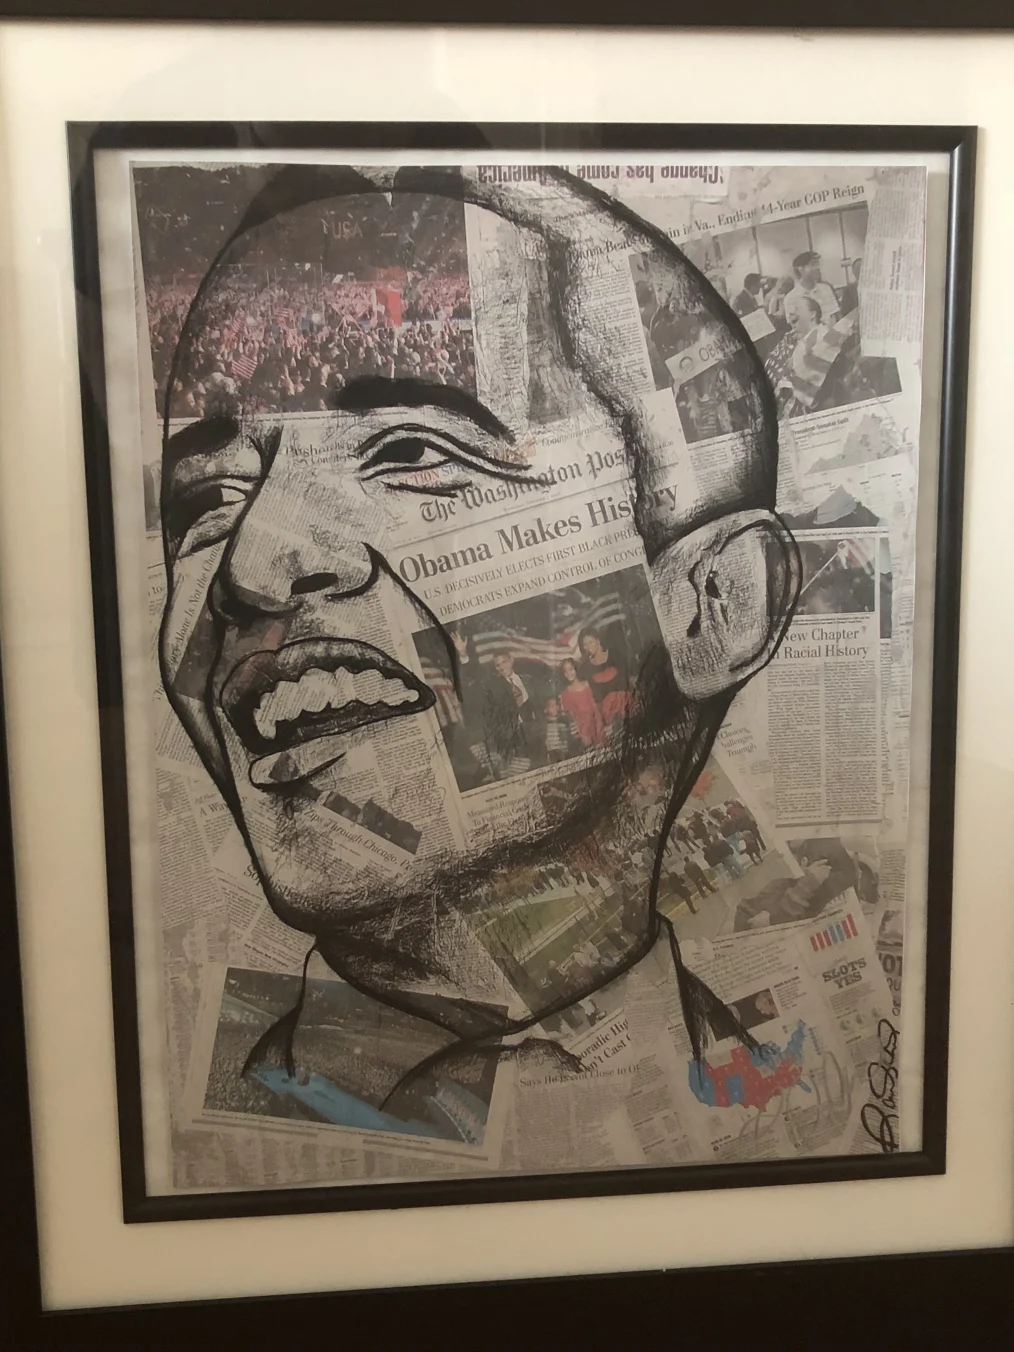 A framed collage of newspaper clippings about Barack Obama's presidential win with a portrait of his head drawn in black on top.